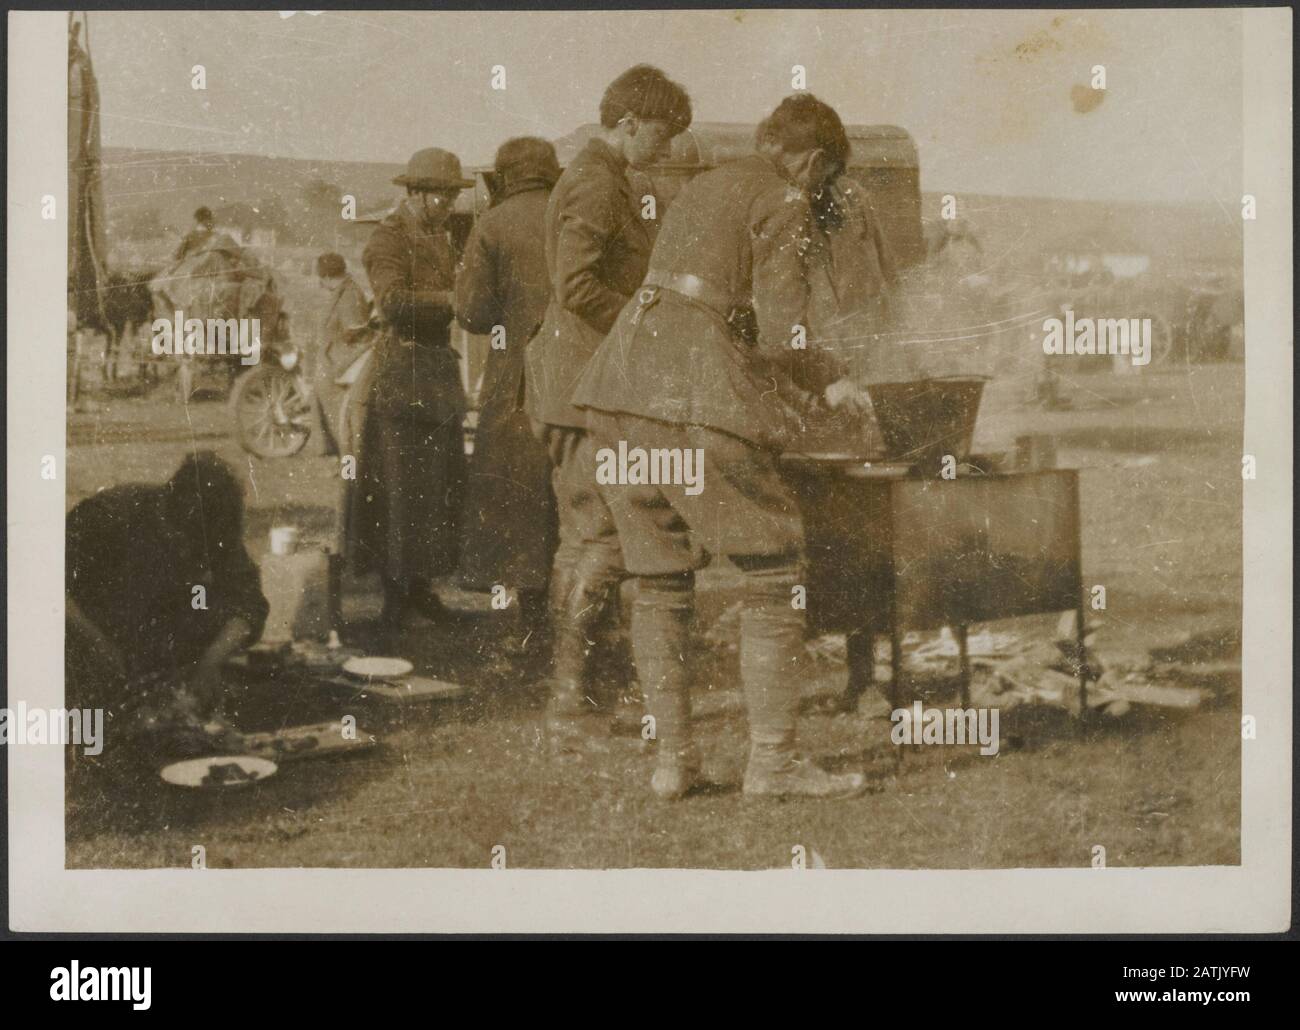 British Nurses' gallant work with the Russians Description: Cooks of the London unit of the Scottish Women's Hospitals during the retreat in the Debrudja. Note the servicable costumes. Annotation: Dapper work of British nurses for the Russians. Cooks from the London unit of the Scottish Women's Hospitals during the retreat in the Dobrogea region. Note the practical clothes Date: {1914-1918} Location: Dobrogea, Romania Keywords: WWI, facades, kitchens, retreats, nurses Stock Photo